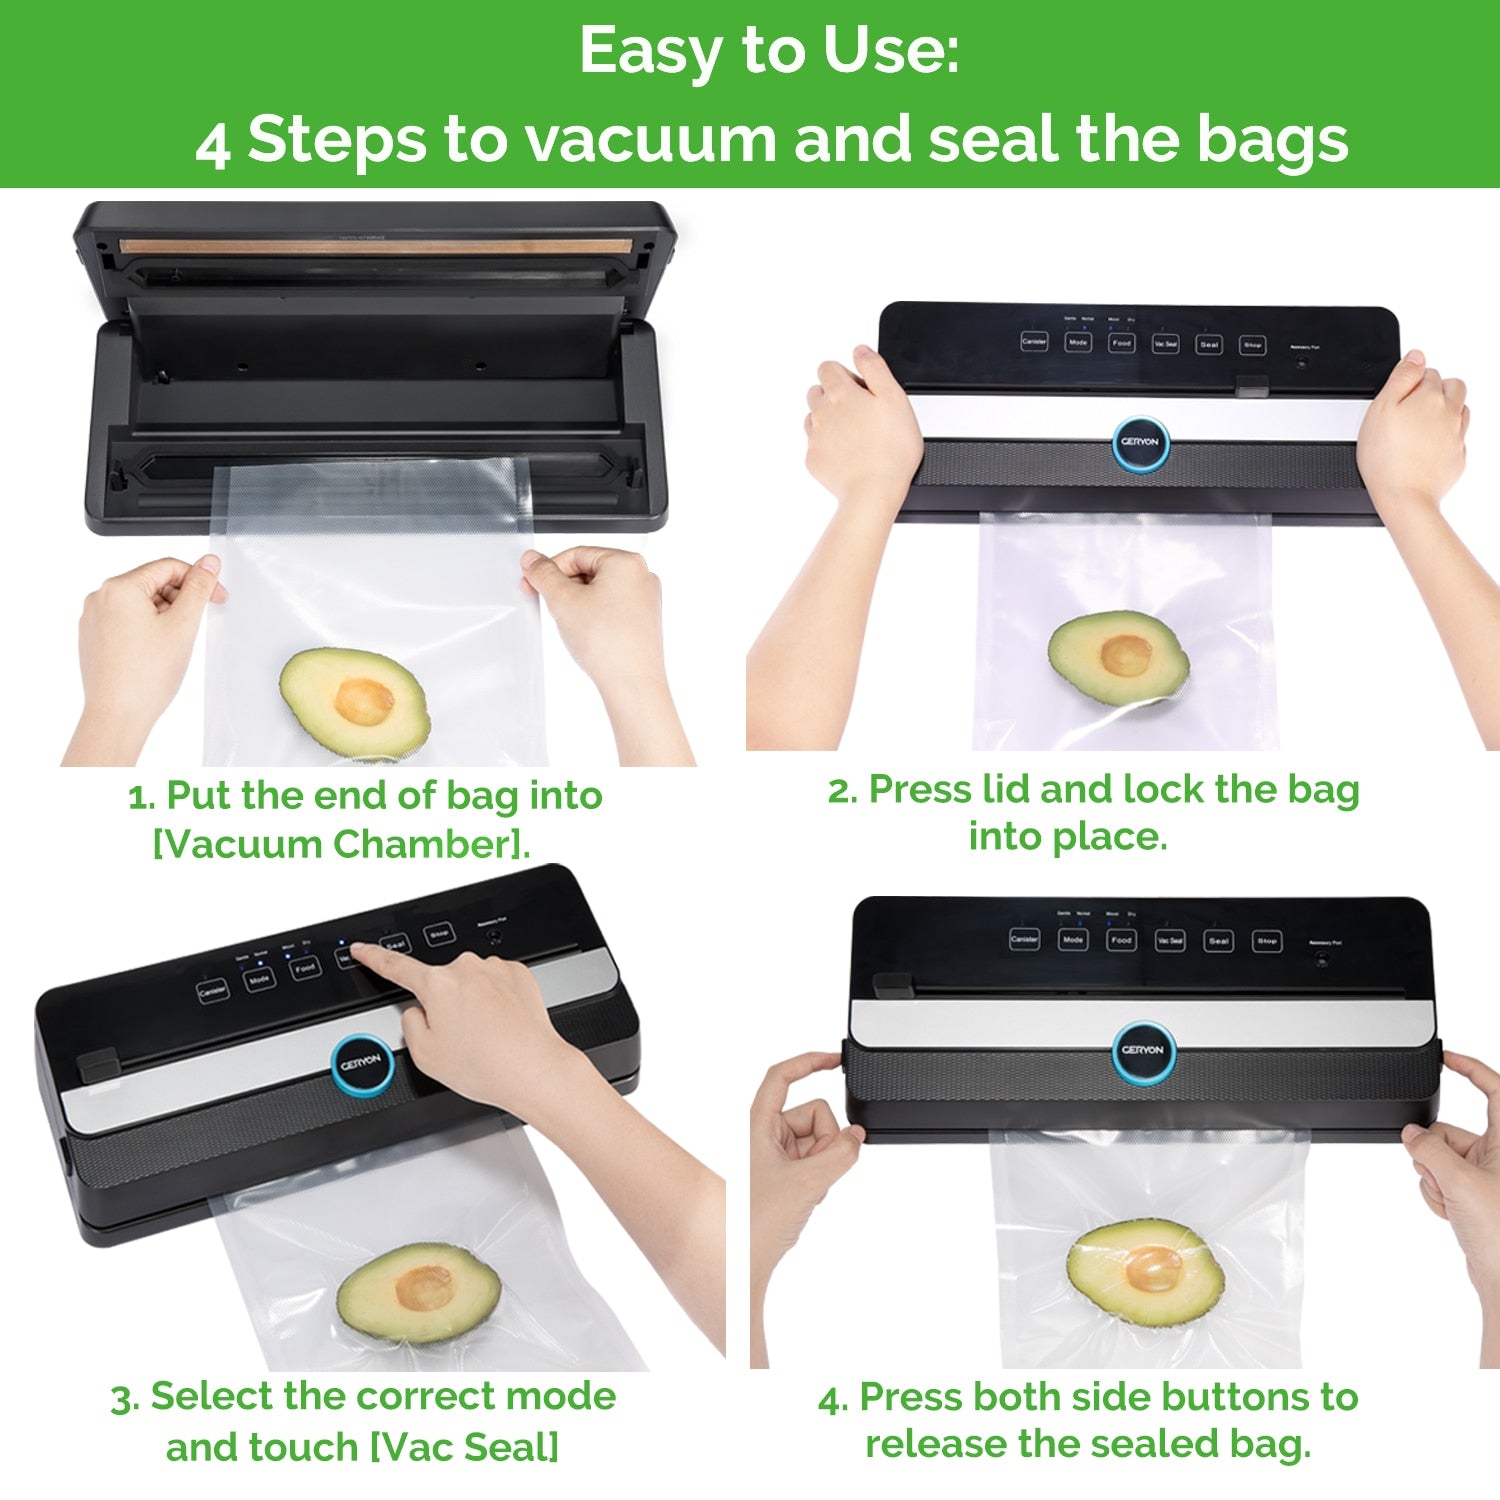 4 step sealing process. Step 1. Put the end of the bag into chamber. 2. Press lid and lock the bag into place. 3. Select the correct mode and touch button - Vac Seal. 4. Press both side buttons to release the sealed bag.